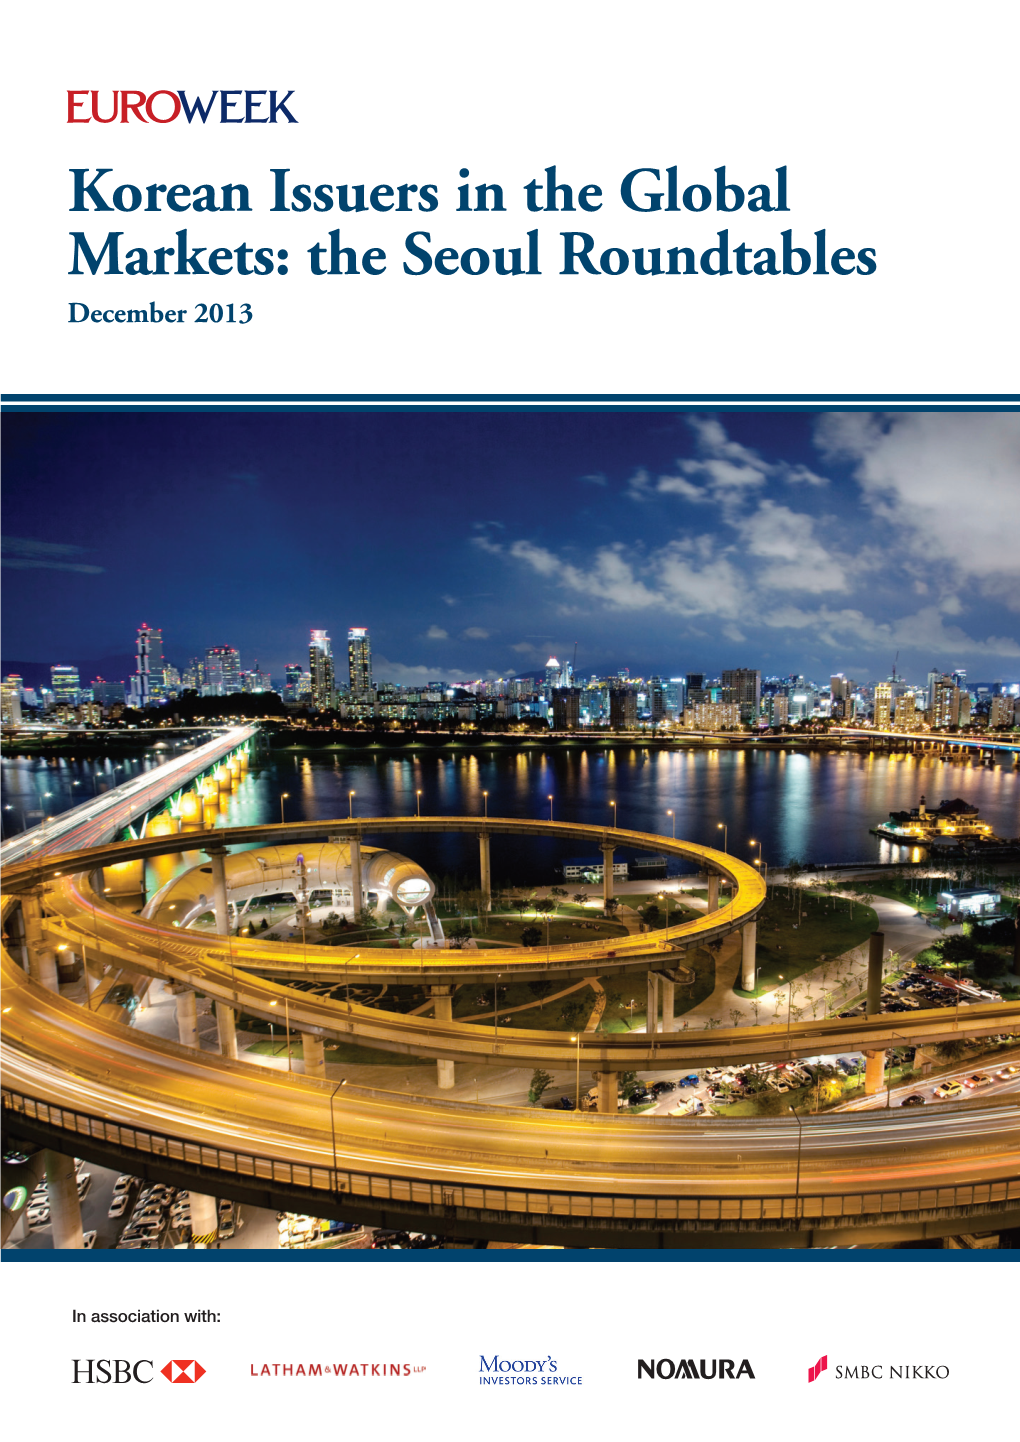 Korea Issuers in the Global Markets: the Seoul Roundtables